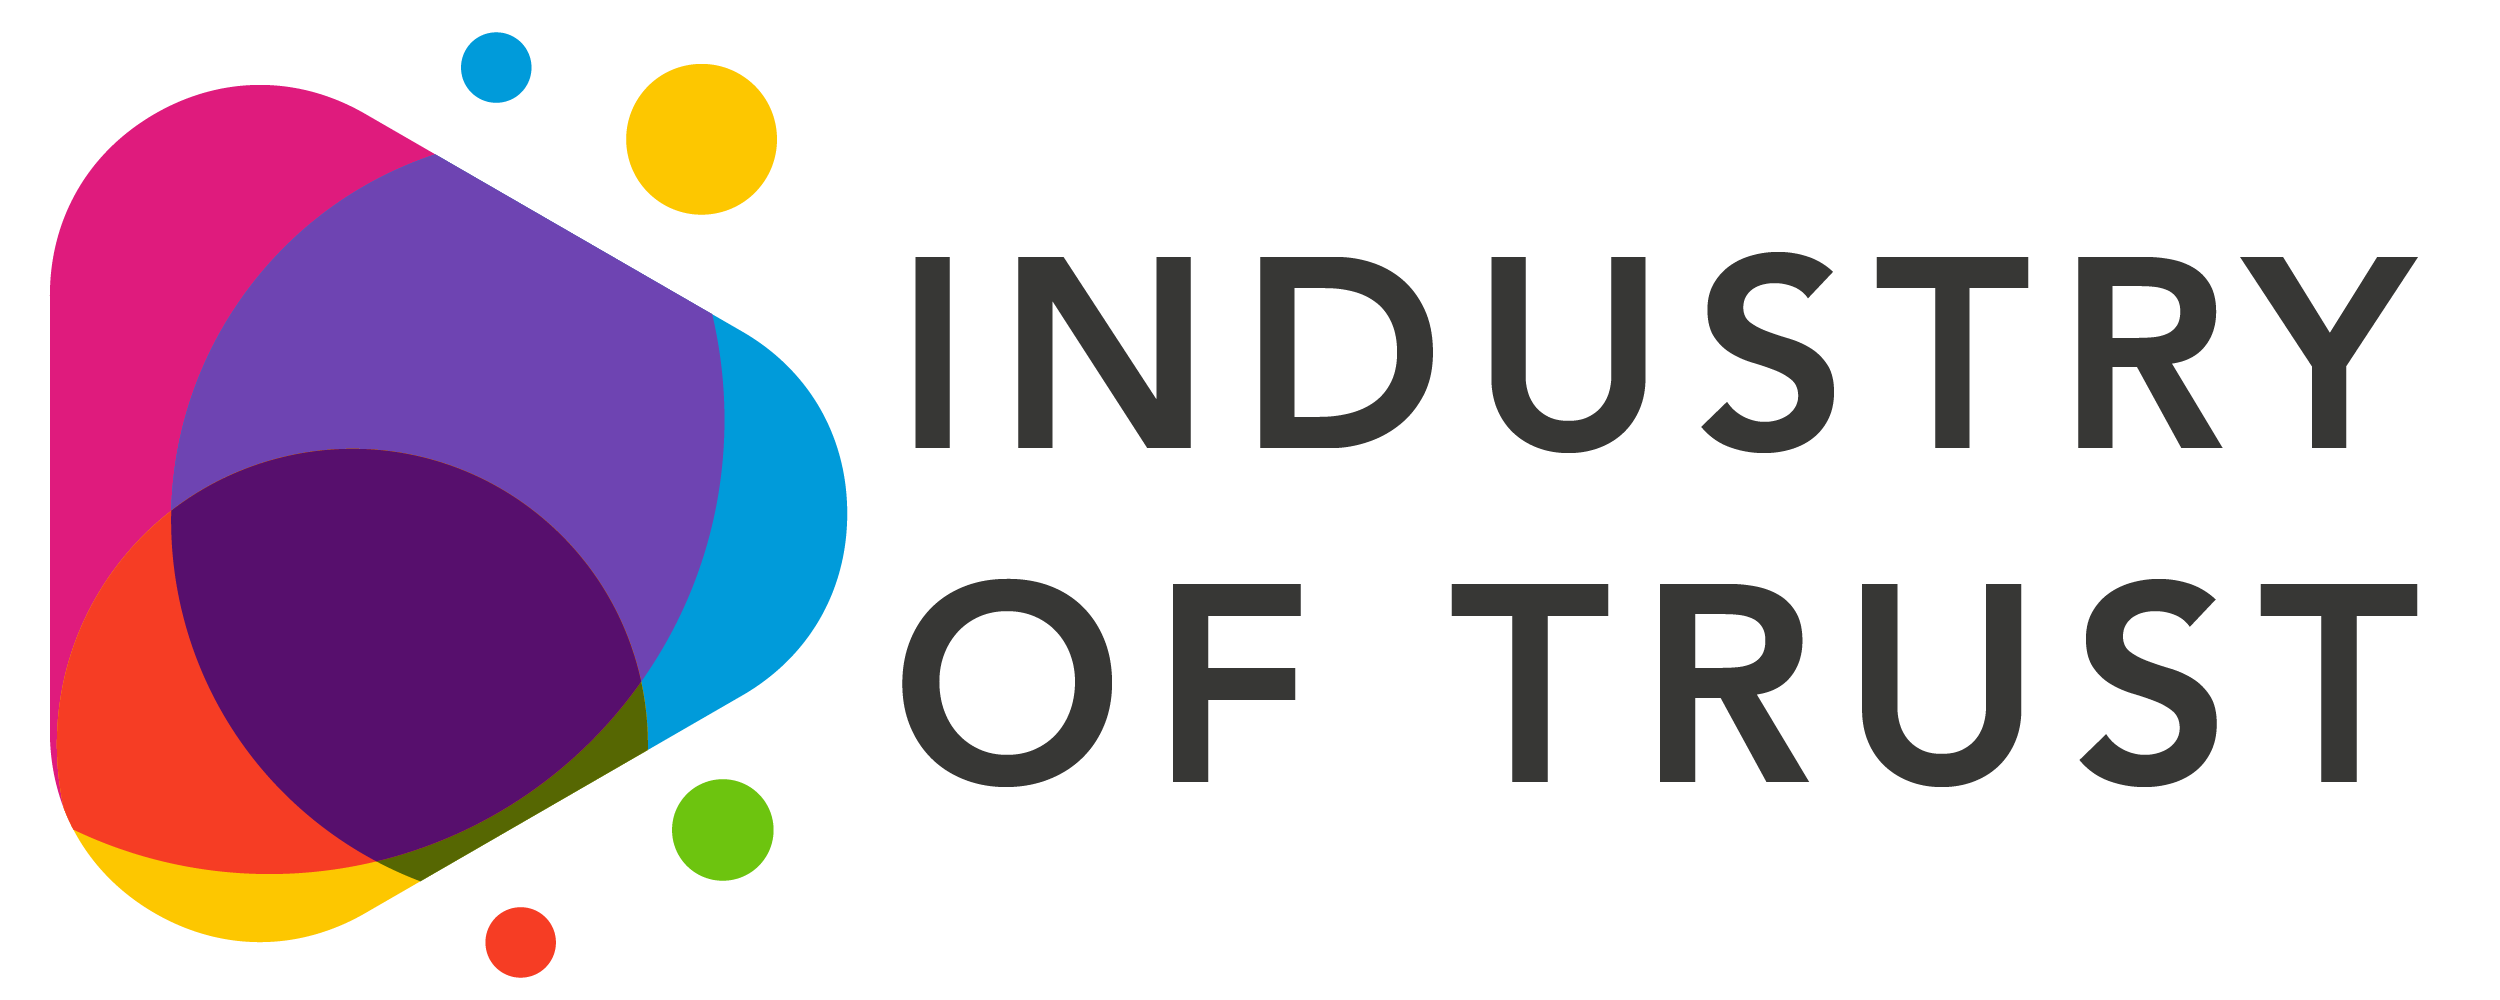 The Industry of Trust Podcast